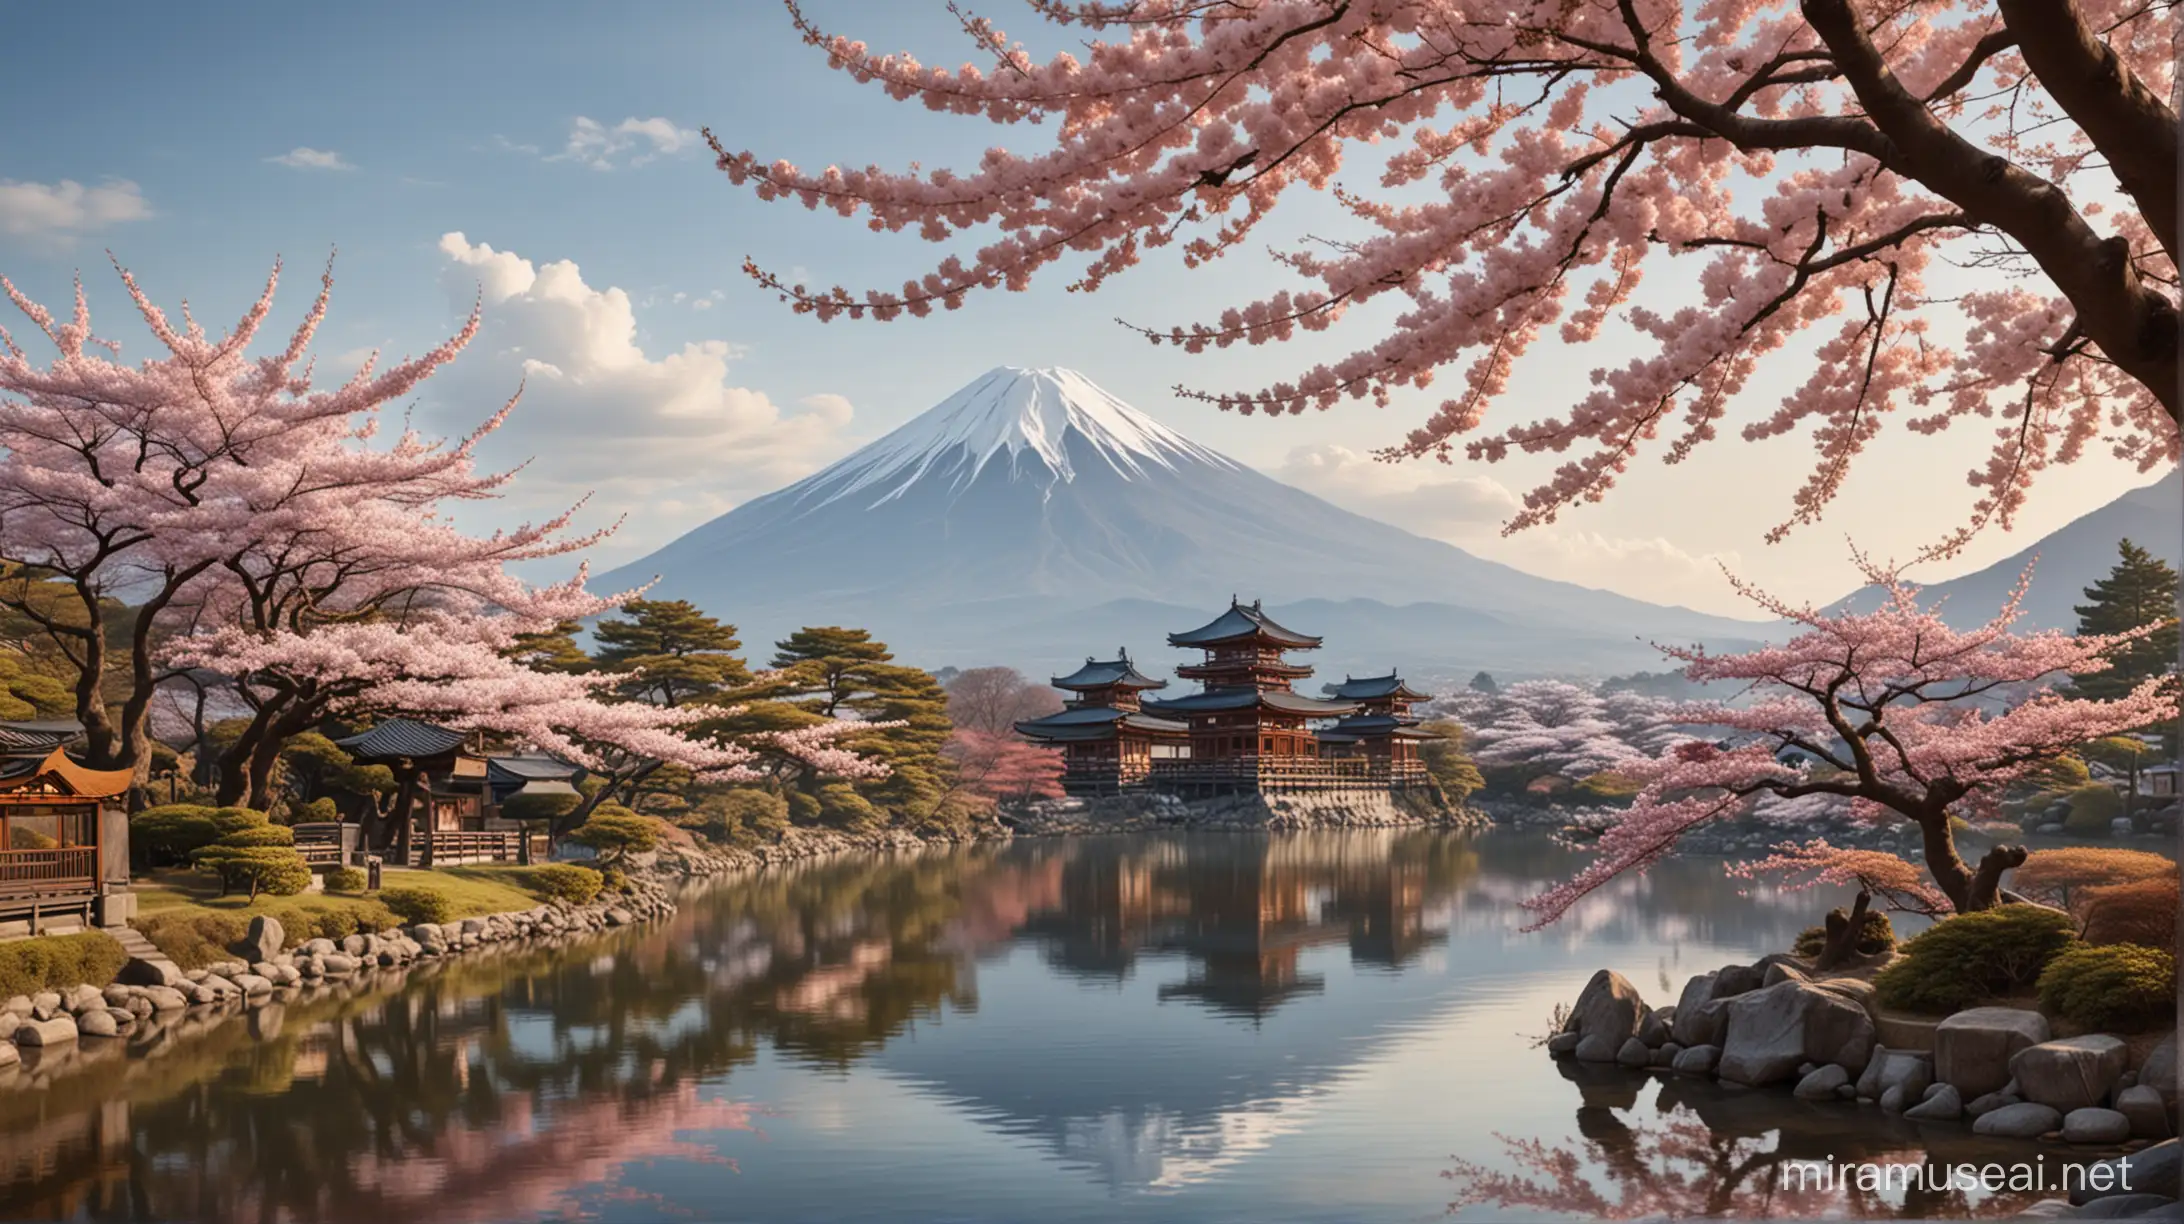 Scenic Japanese Landscape with Mount Fuji Temples Lake and Cherry Blossom Trees in Photo Realism